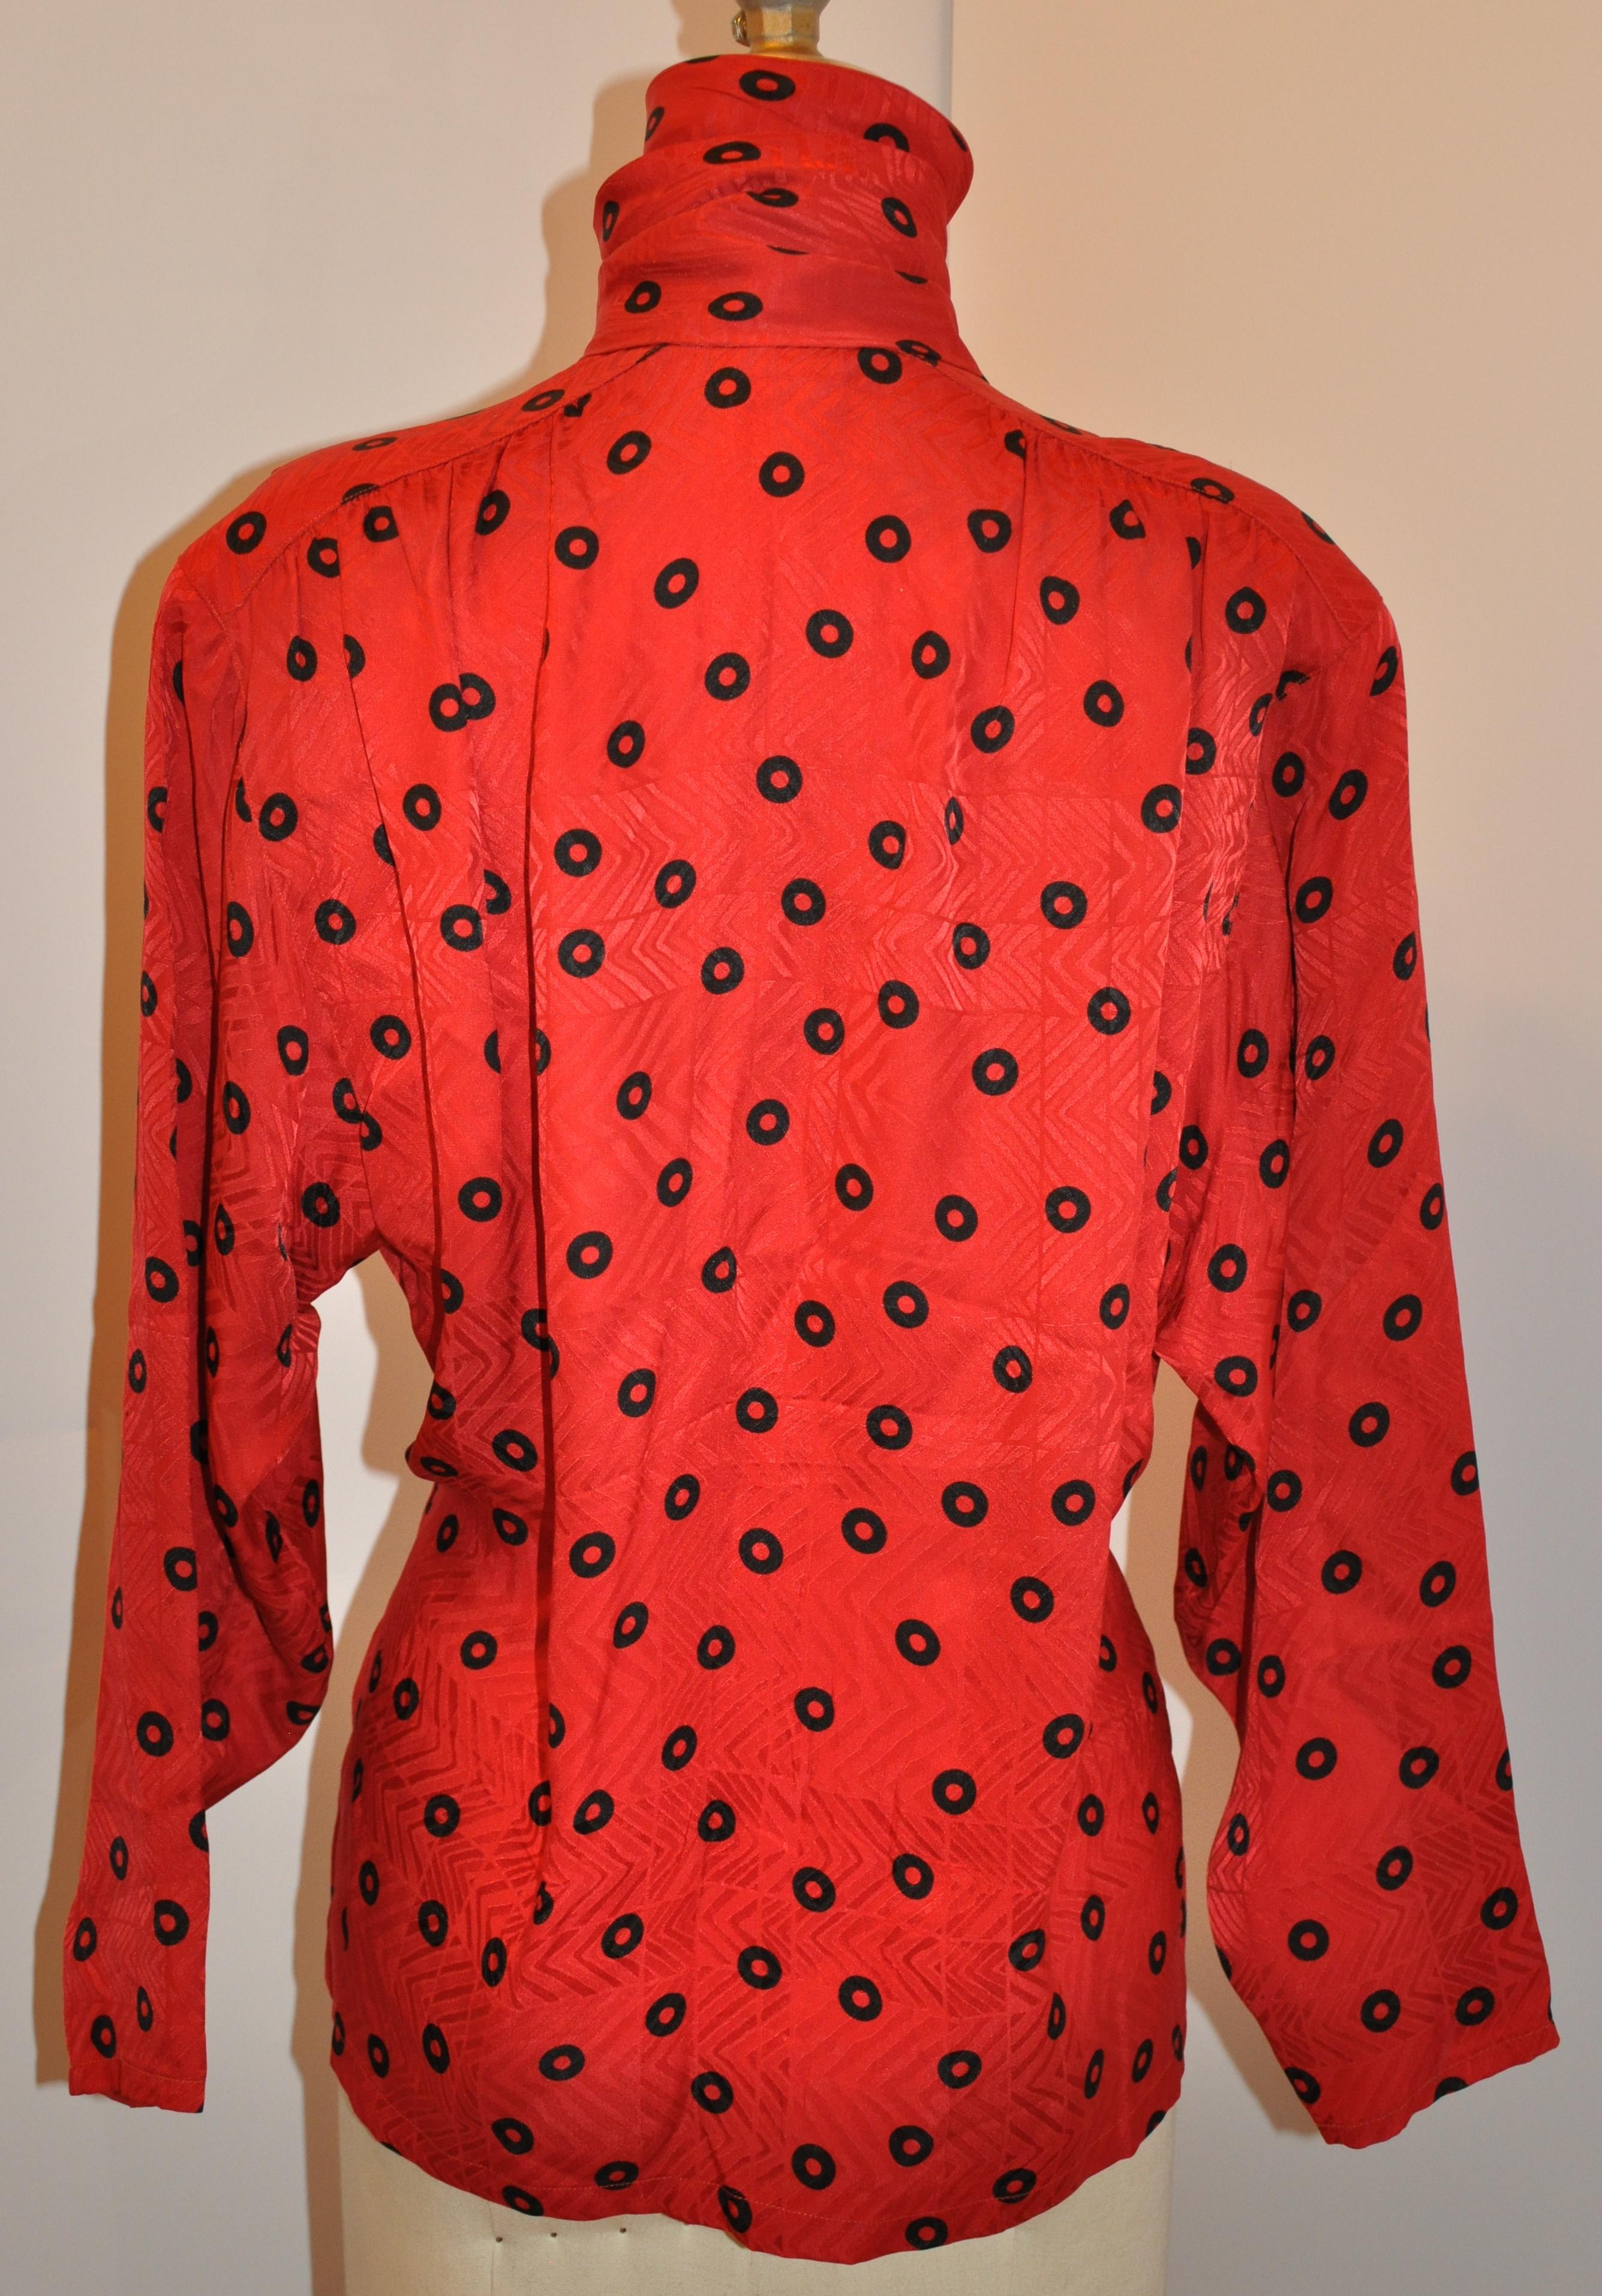       Christian Dior wonderfully elegant Red-on-red abstract print accented with black polka-dot silk crepe di chine blouse features an 5 1/2 inches by 52 inches extended collar offering many options in wearing. The interior has French seams and